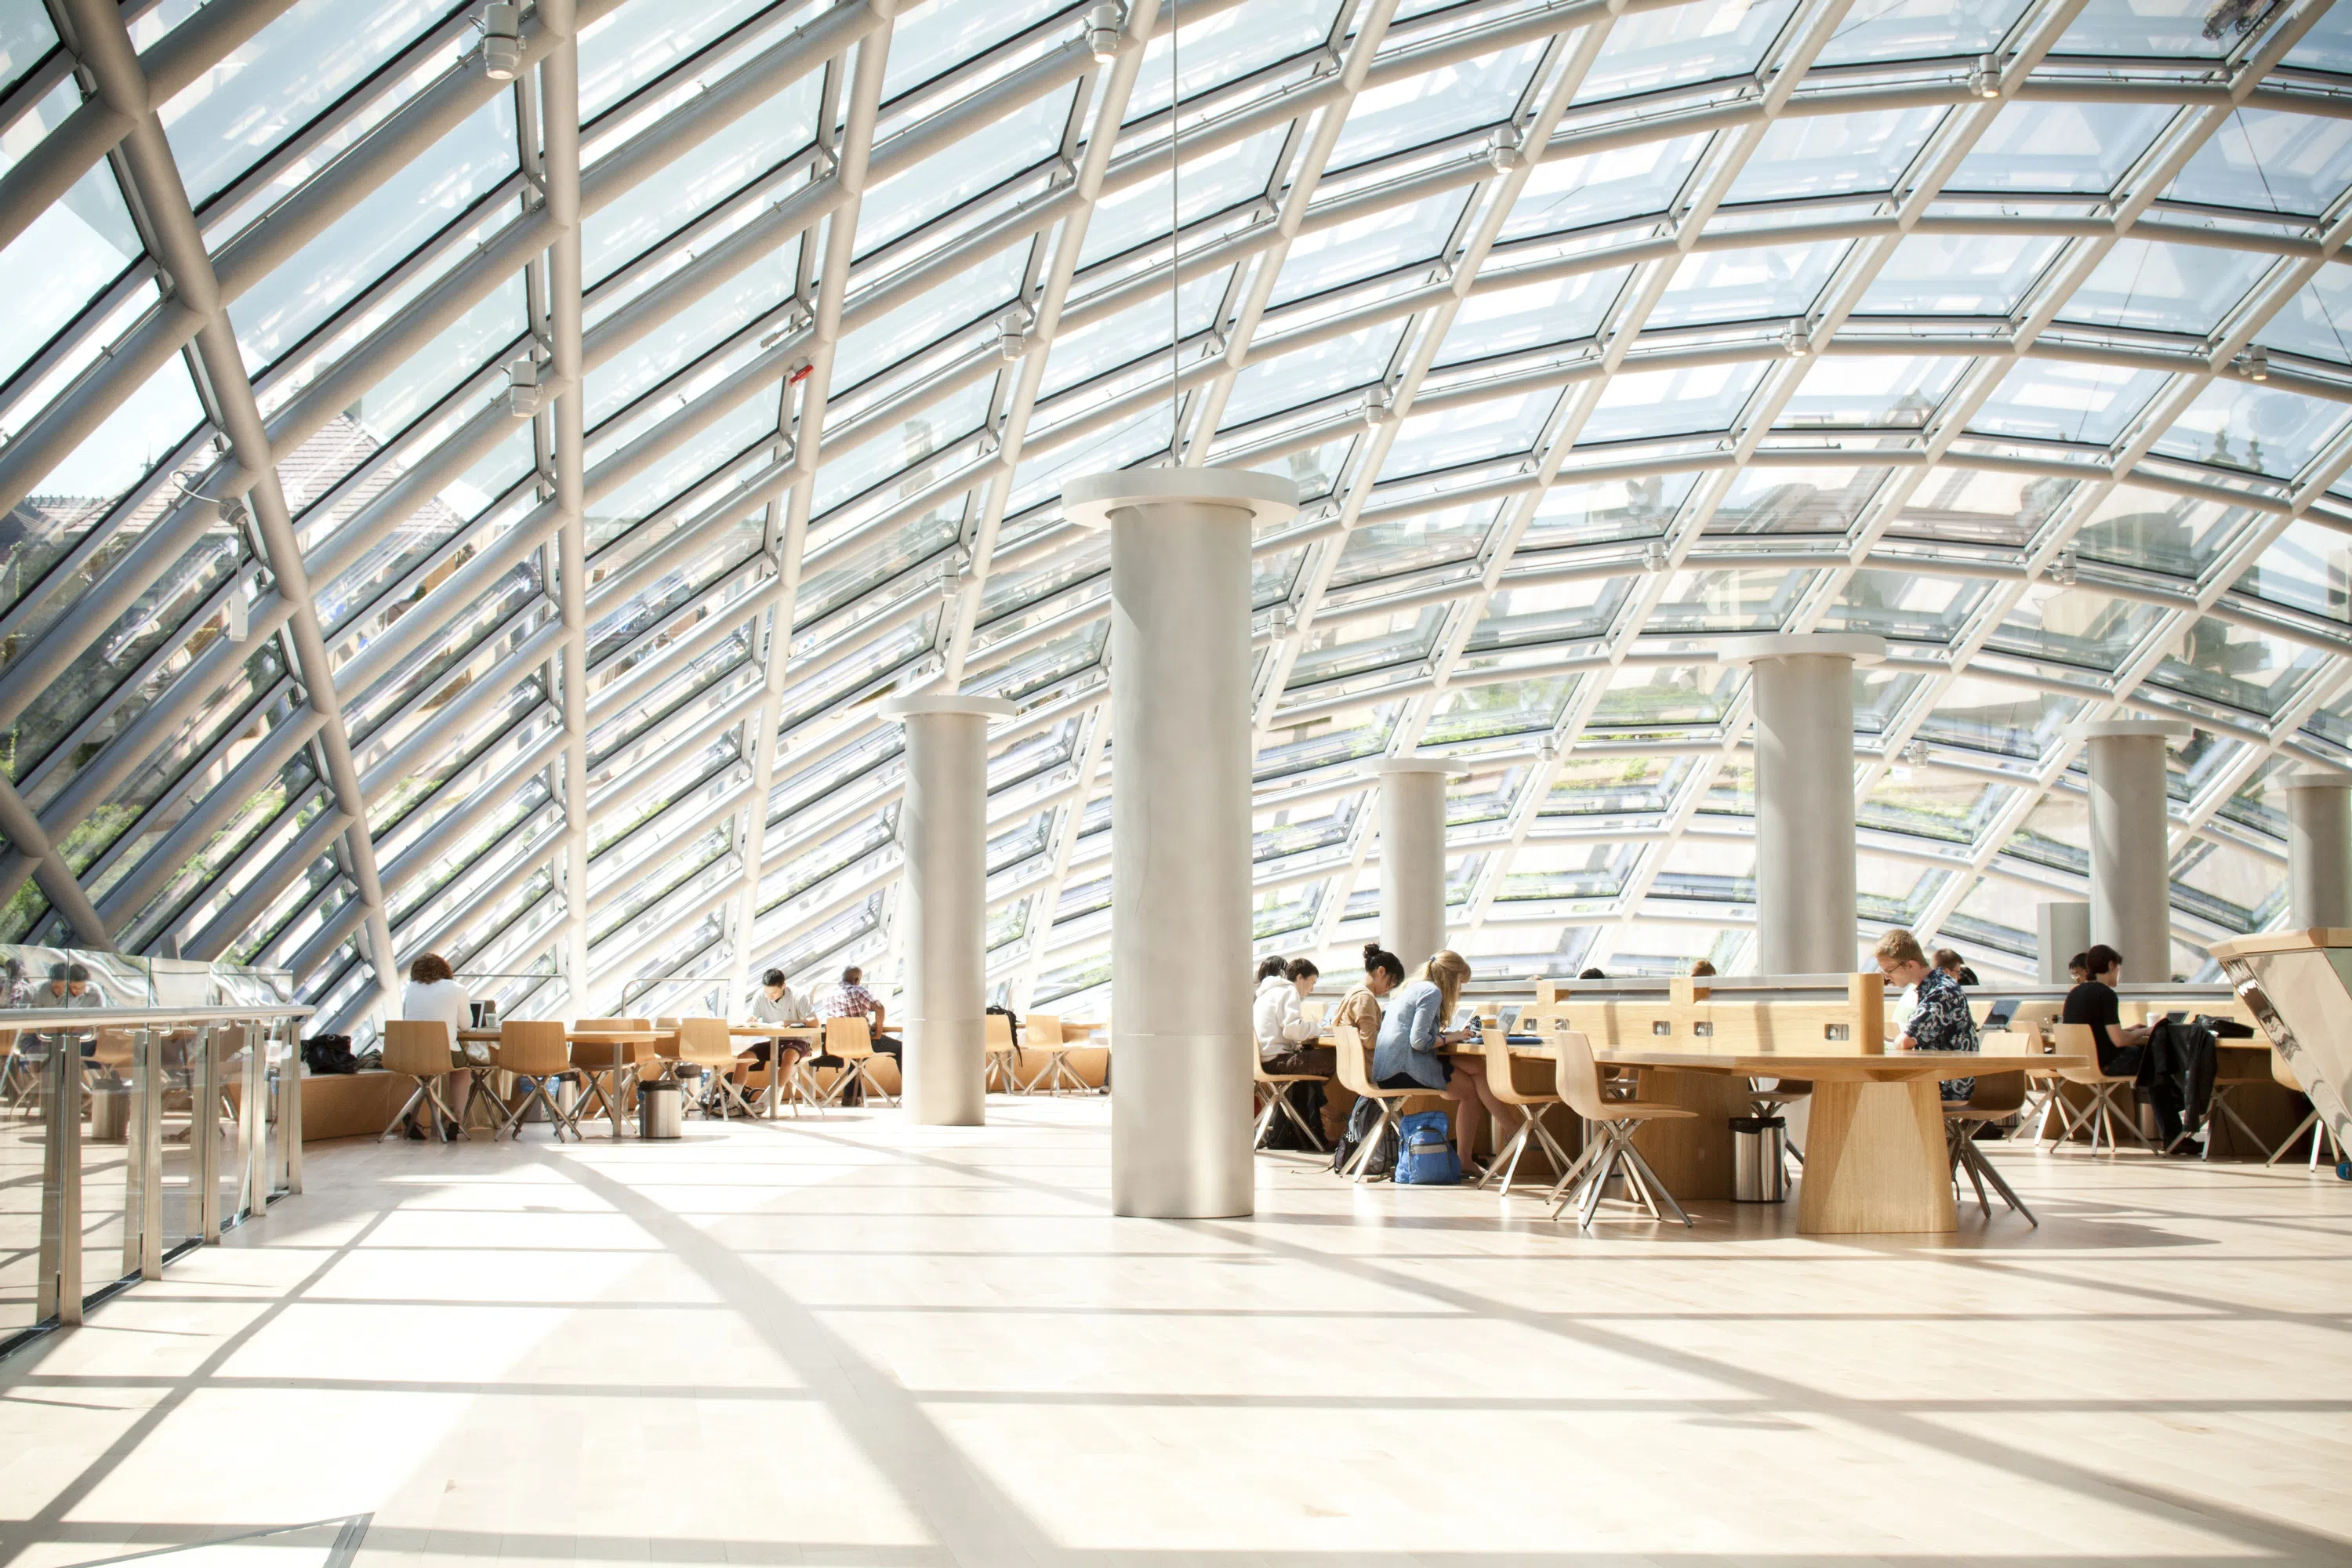 Interior of a large glass dome room with students sat at desks around the area